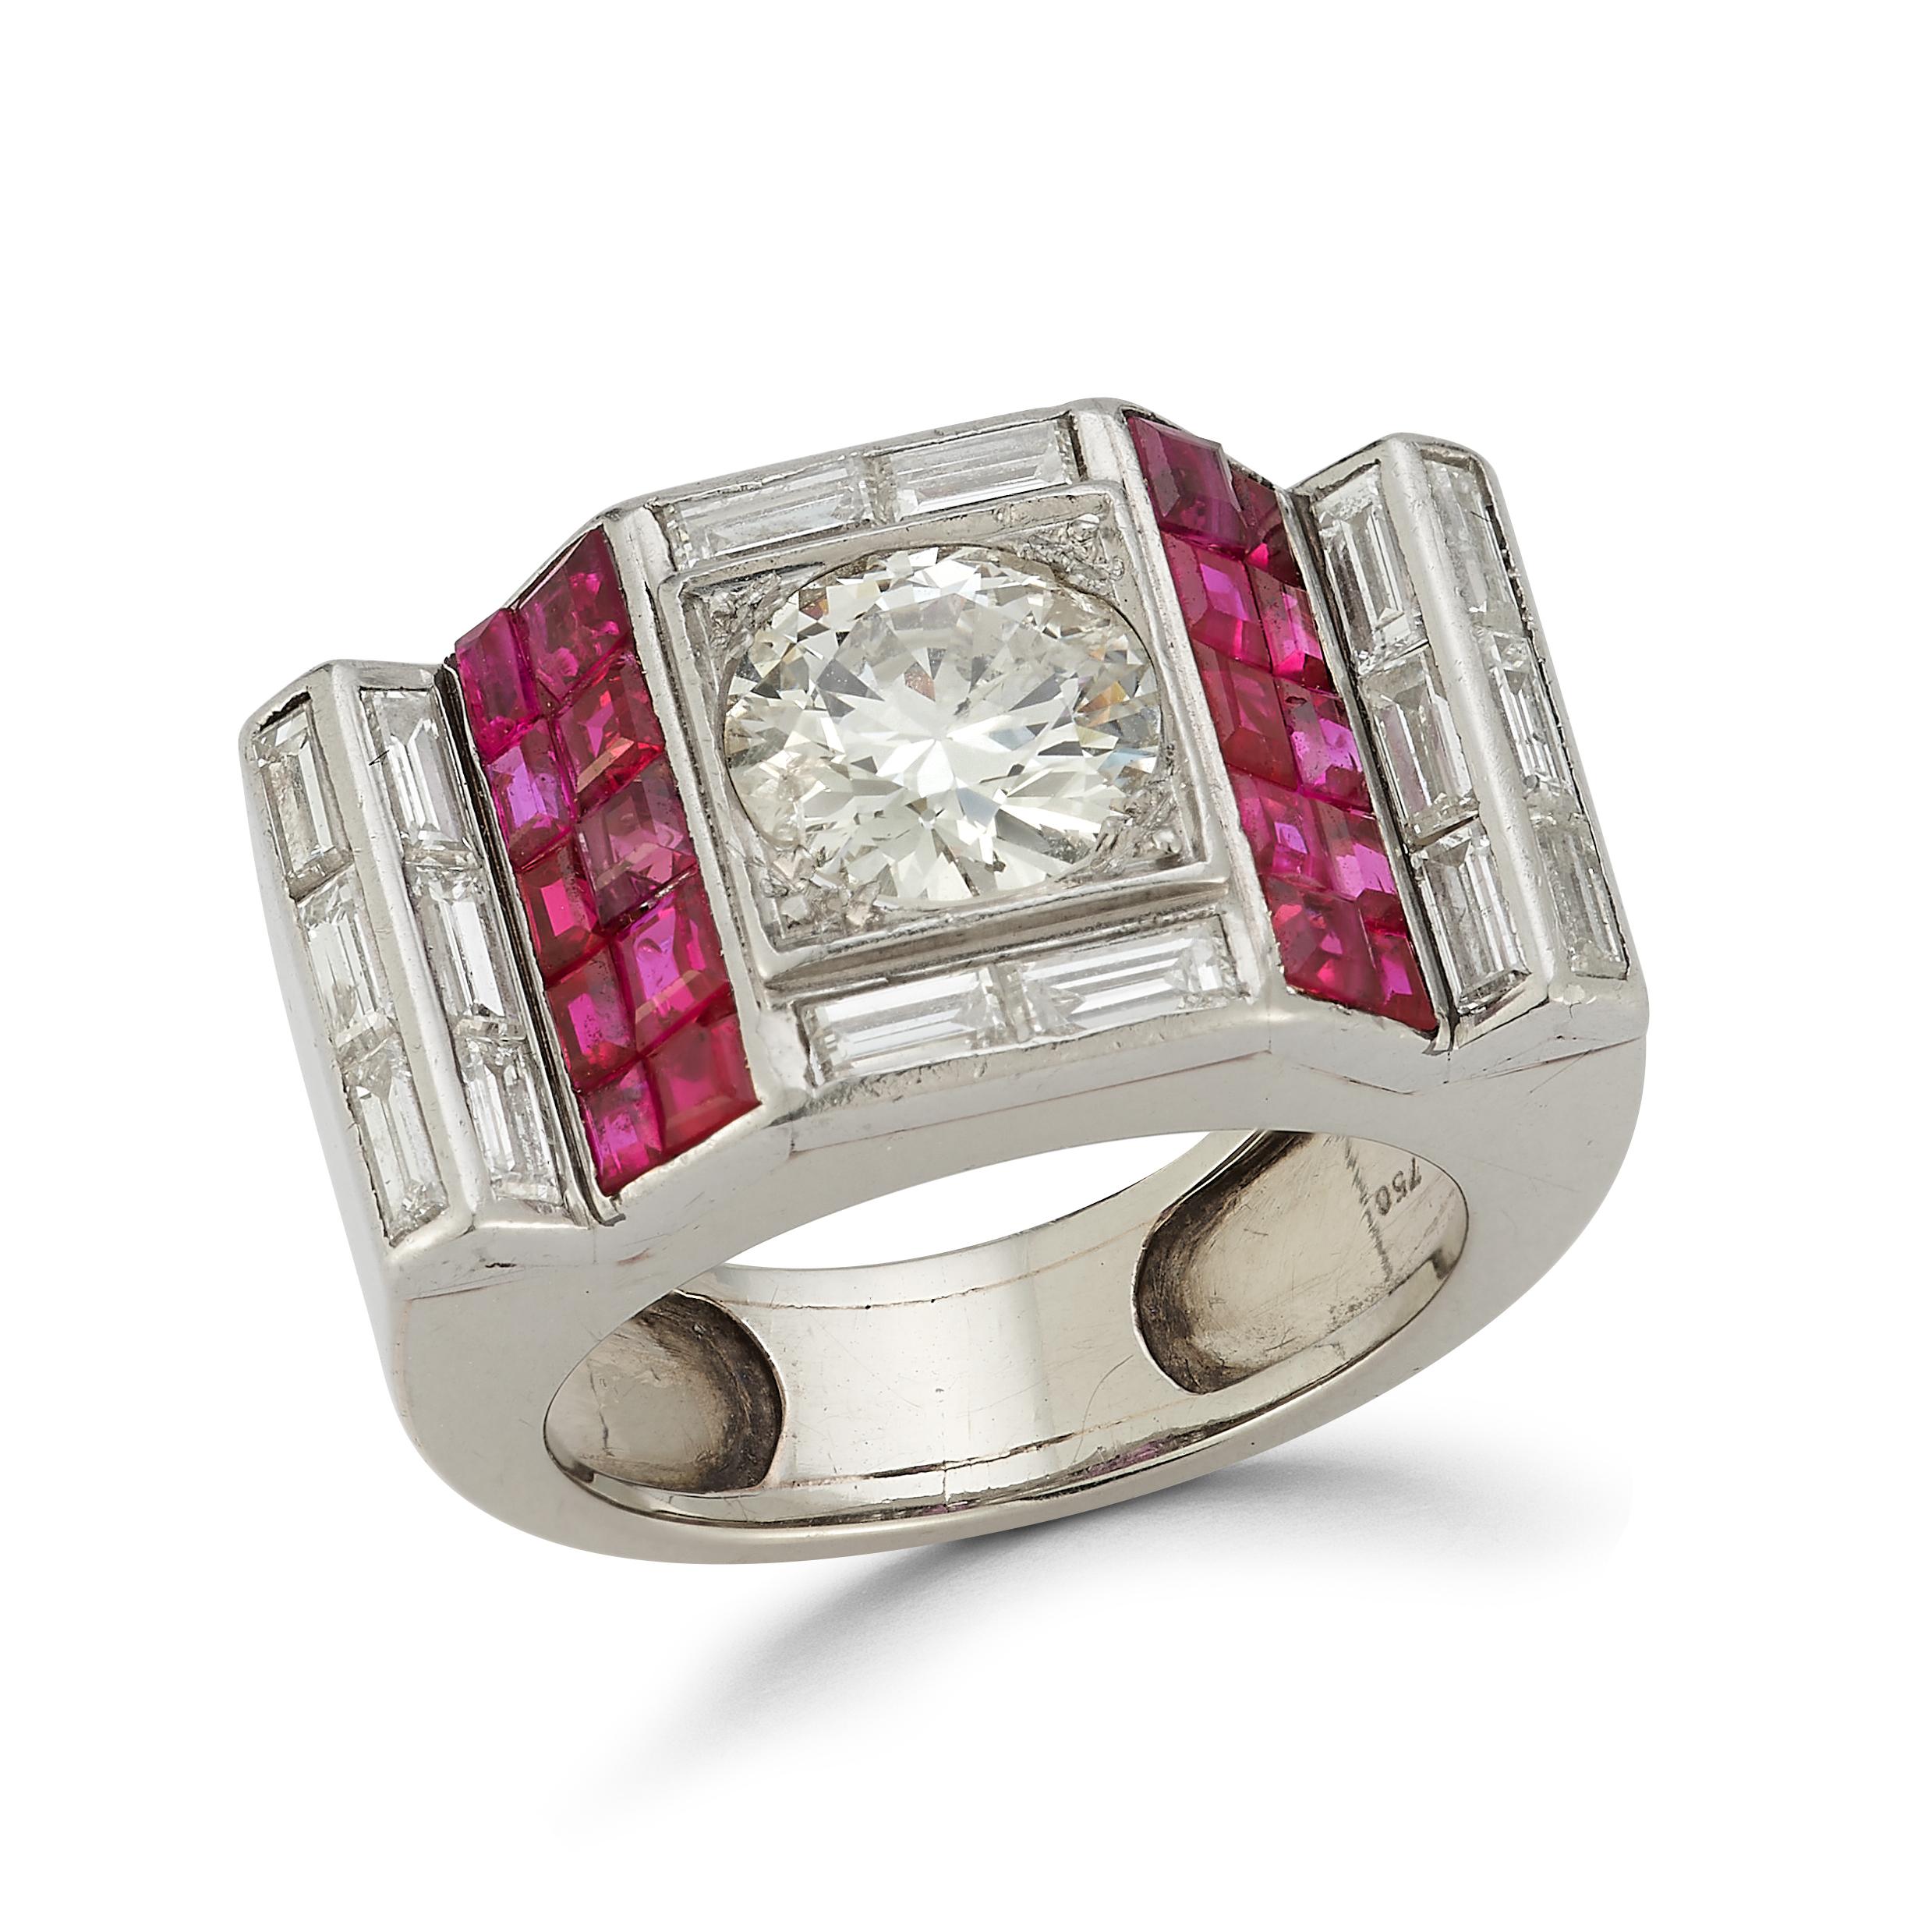 Van Cleef & Arpels Diamond & Ruby Ring

An 18 karat white gold ring reminiscent of mystery setting set with a central old European cut diamond, weighing approximately 1.4 carats, framed by 16 baguette cut diamonds and 20 square cut rubies

Signed